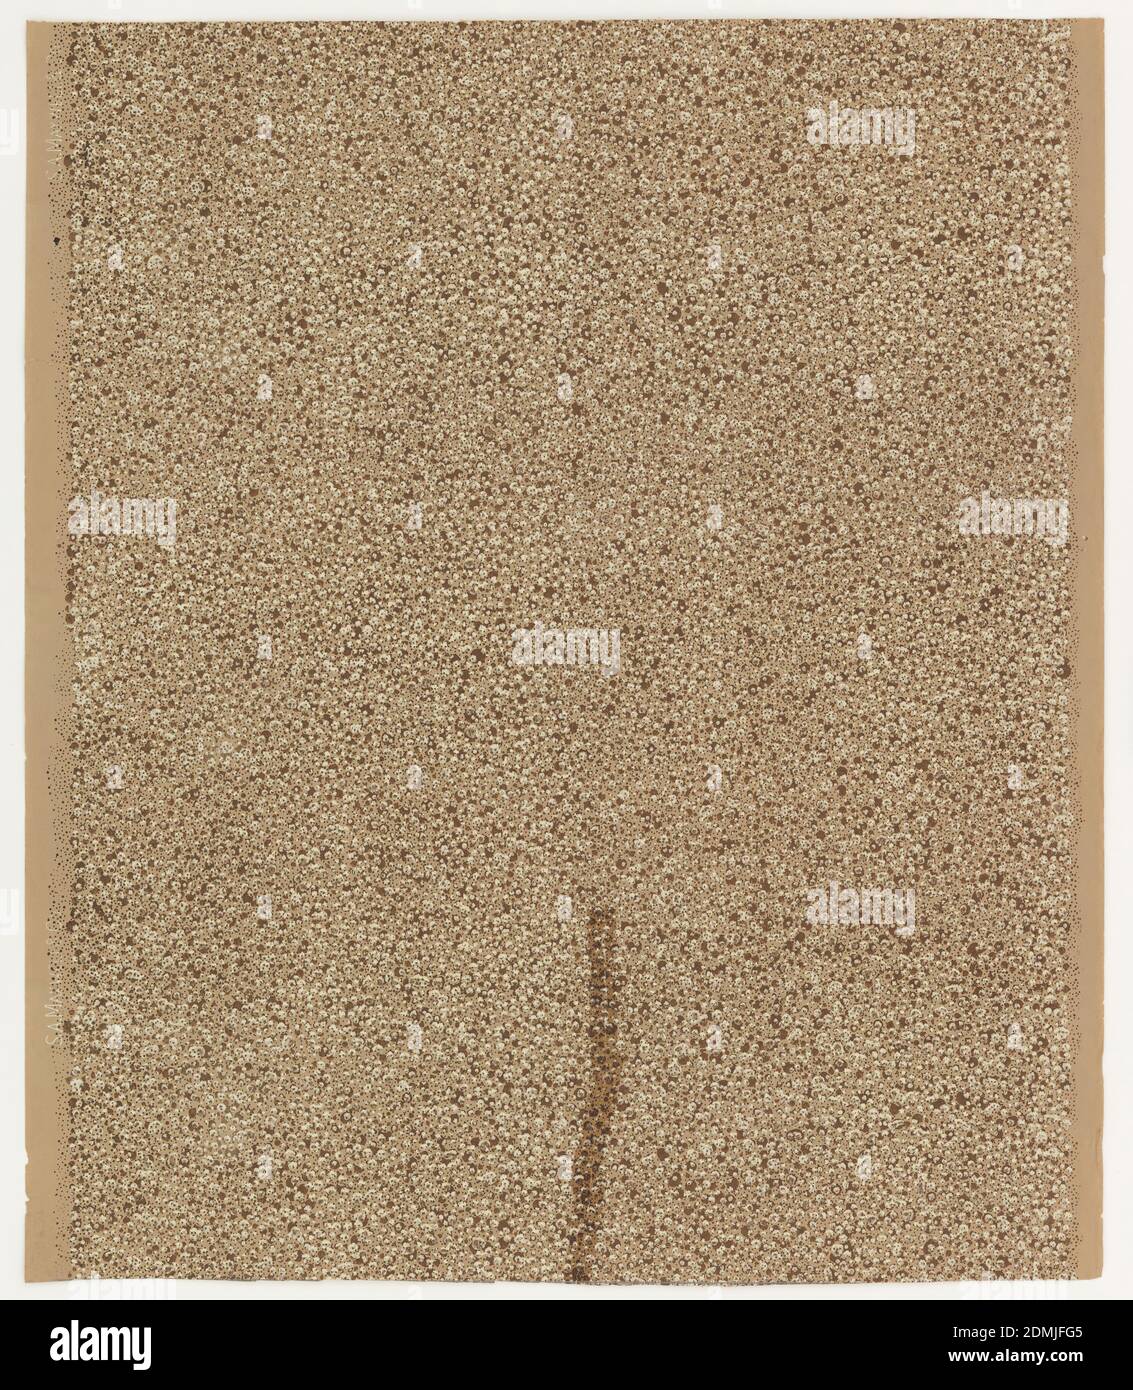 Sidewall, Maxwell & Co., S.A., Chicago, Illinois, USA, Machine-printed paper, Allover overlapping dots in gray, white, and dark green or brown., USA, 1905–1915, Wallcoverings, Sidewall Stock Photo